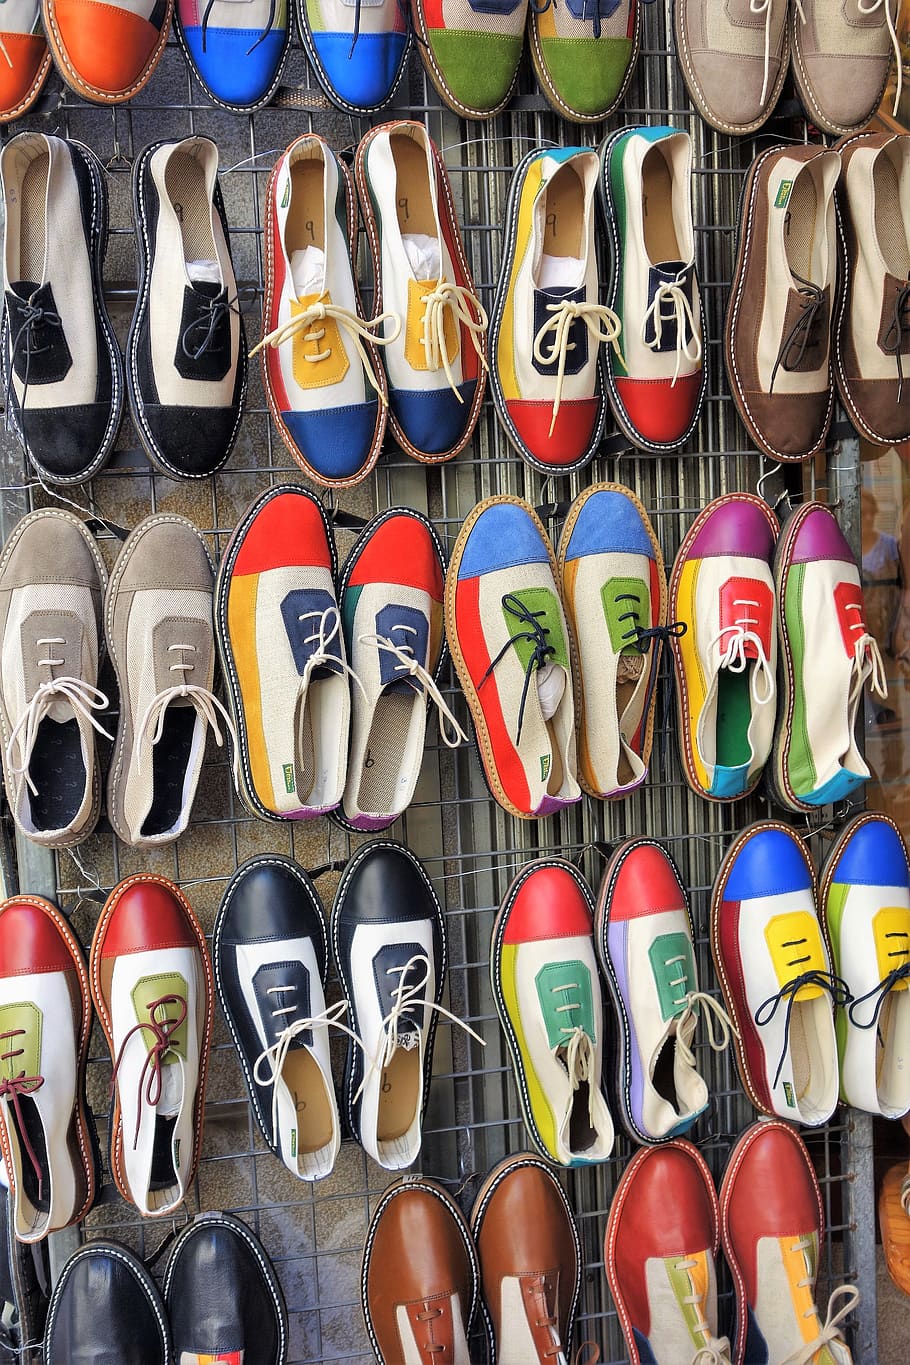 footwear, shoe, clothing, color, fashion, soller, canvas shoes, mallorca, choice, variation